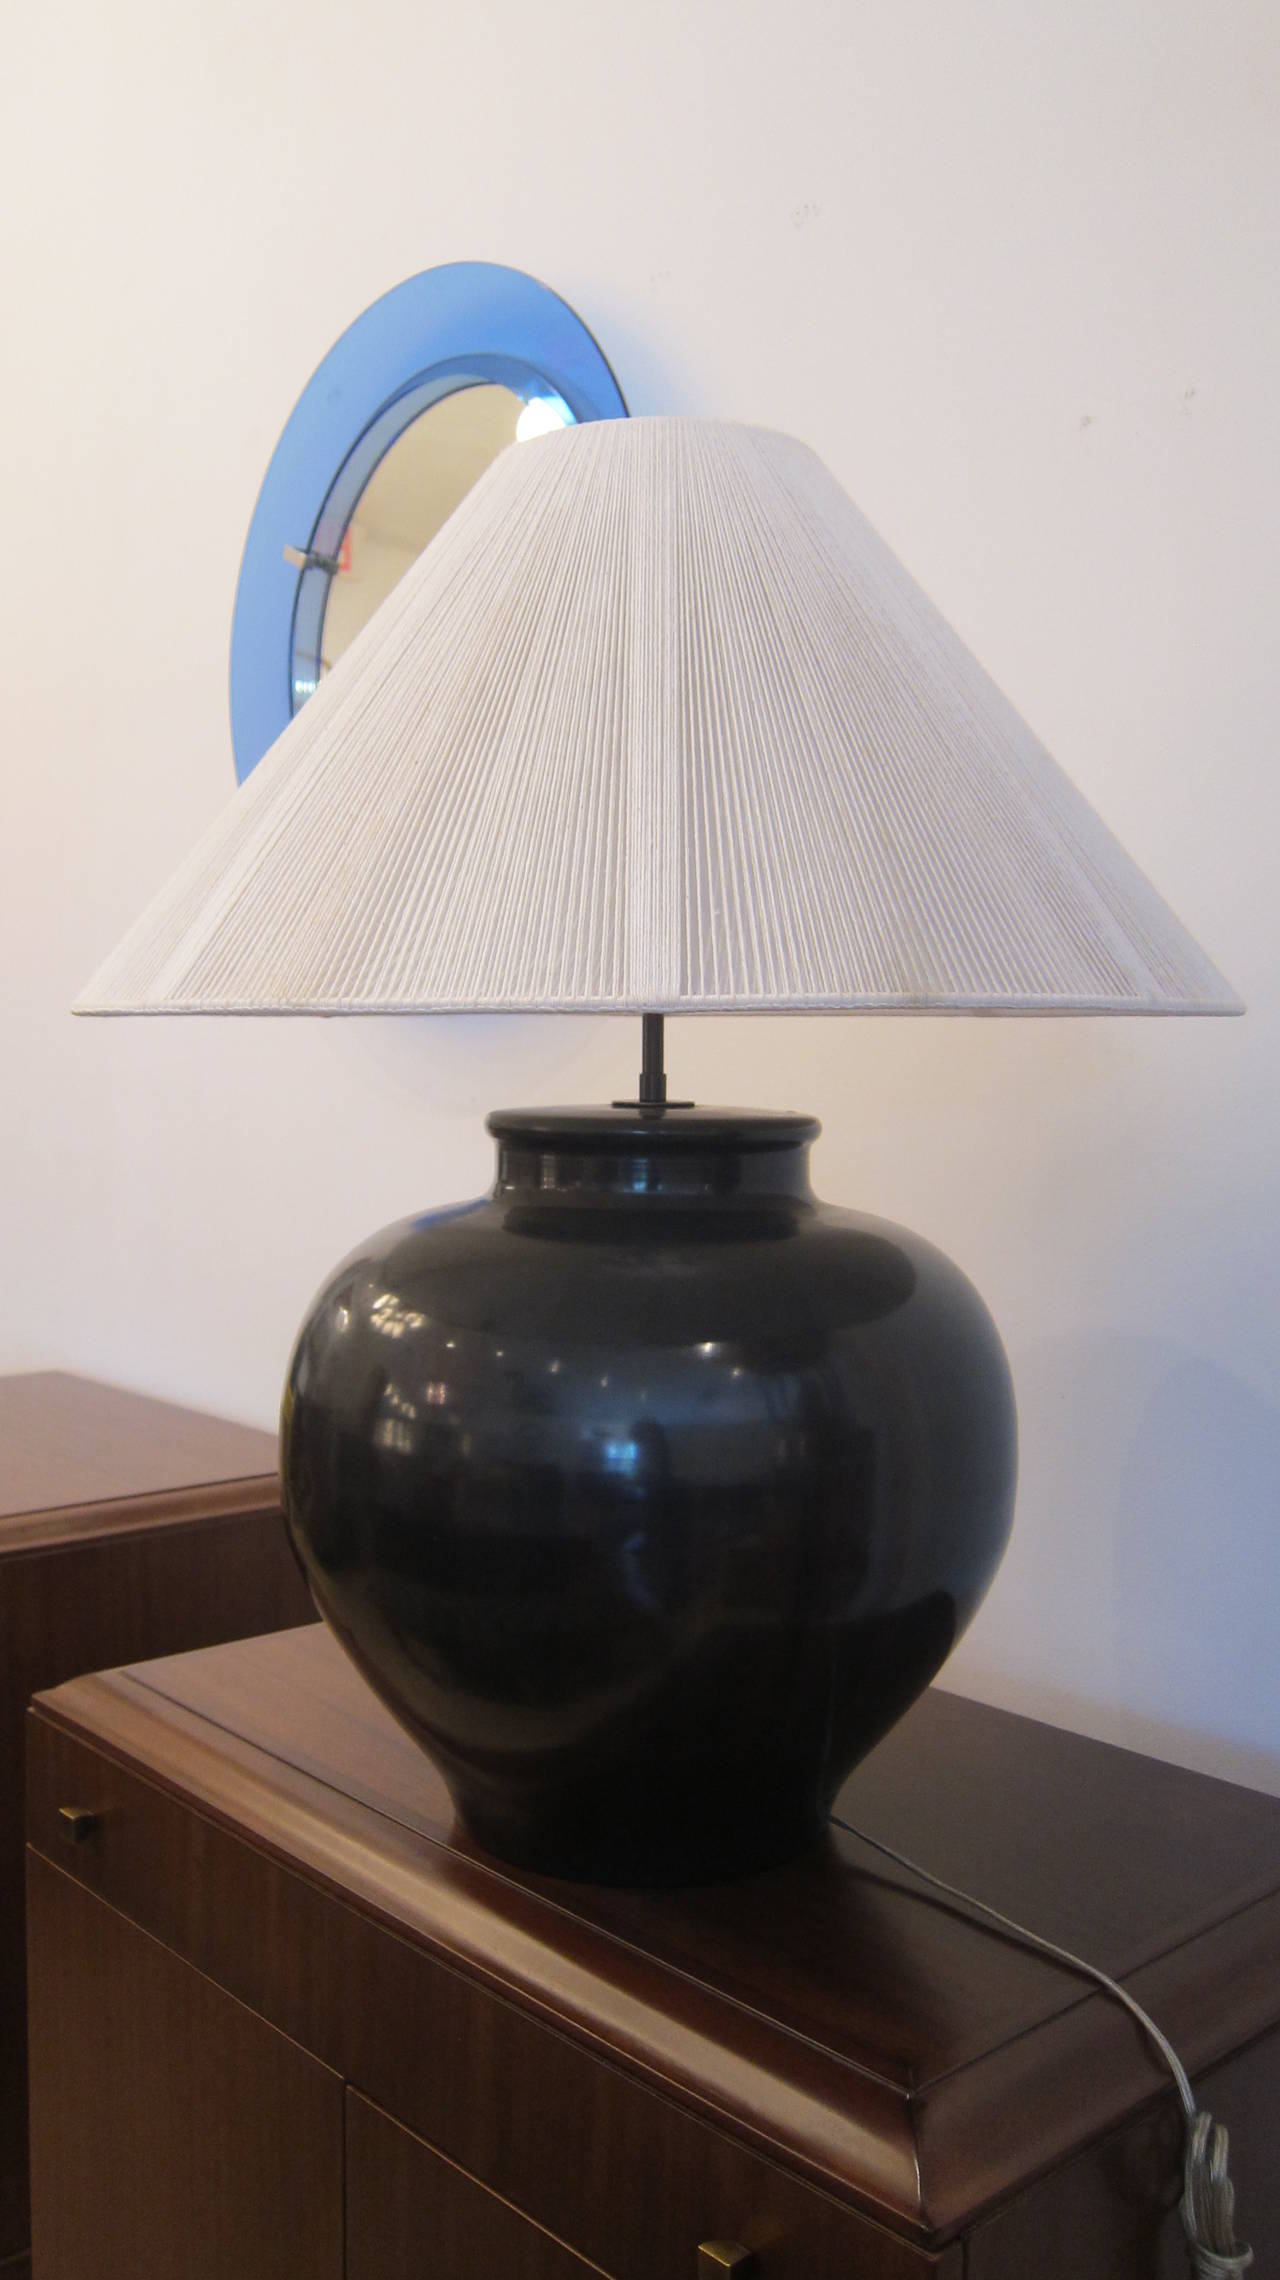 Large Ming base table lamp by Karl Springer oil rubbed bronze patina. This table lamp is documented.
FREE SHIPPING: White Glove to Continental US.